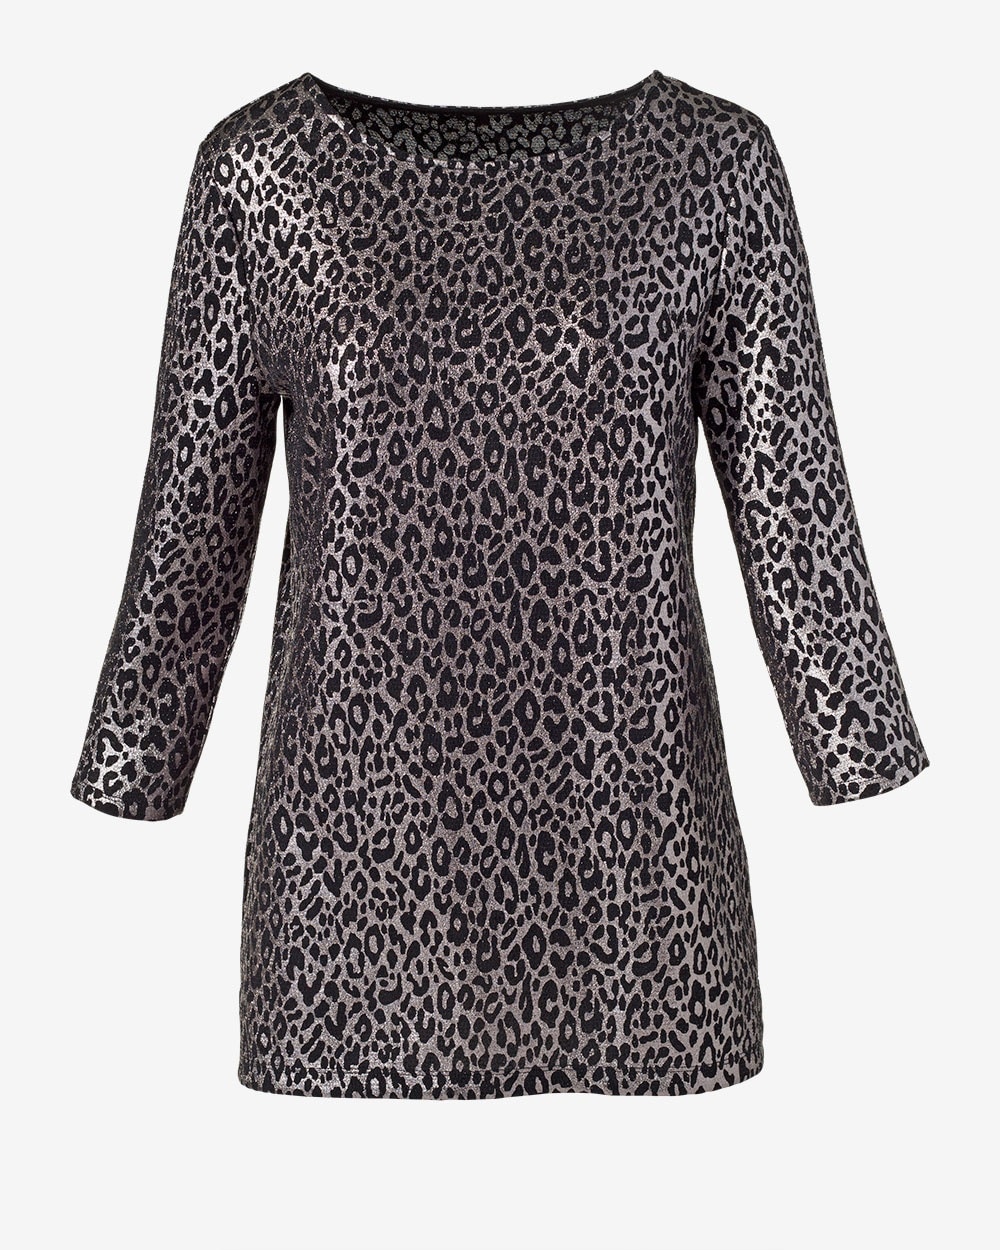 Easywear Graphic Leopard Shimmer 3/4-Sleeve Tunic